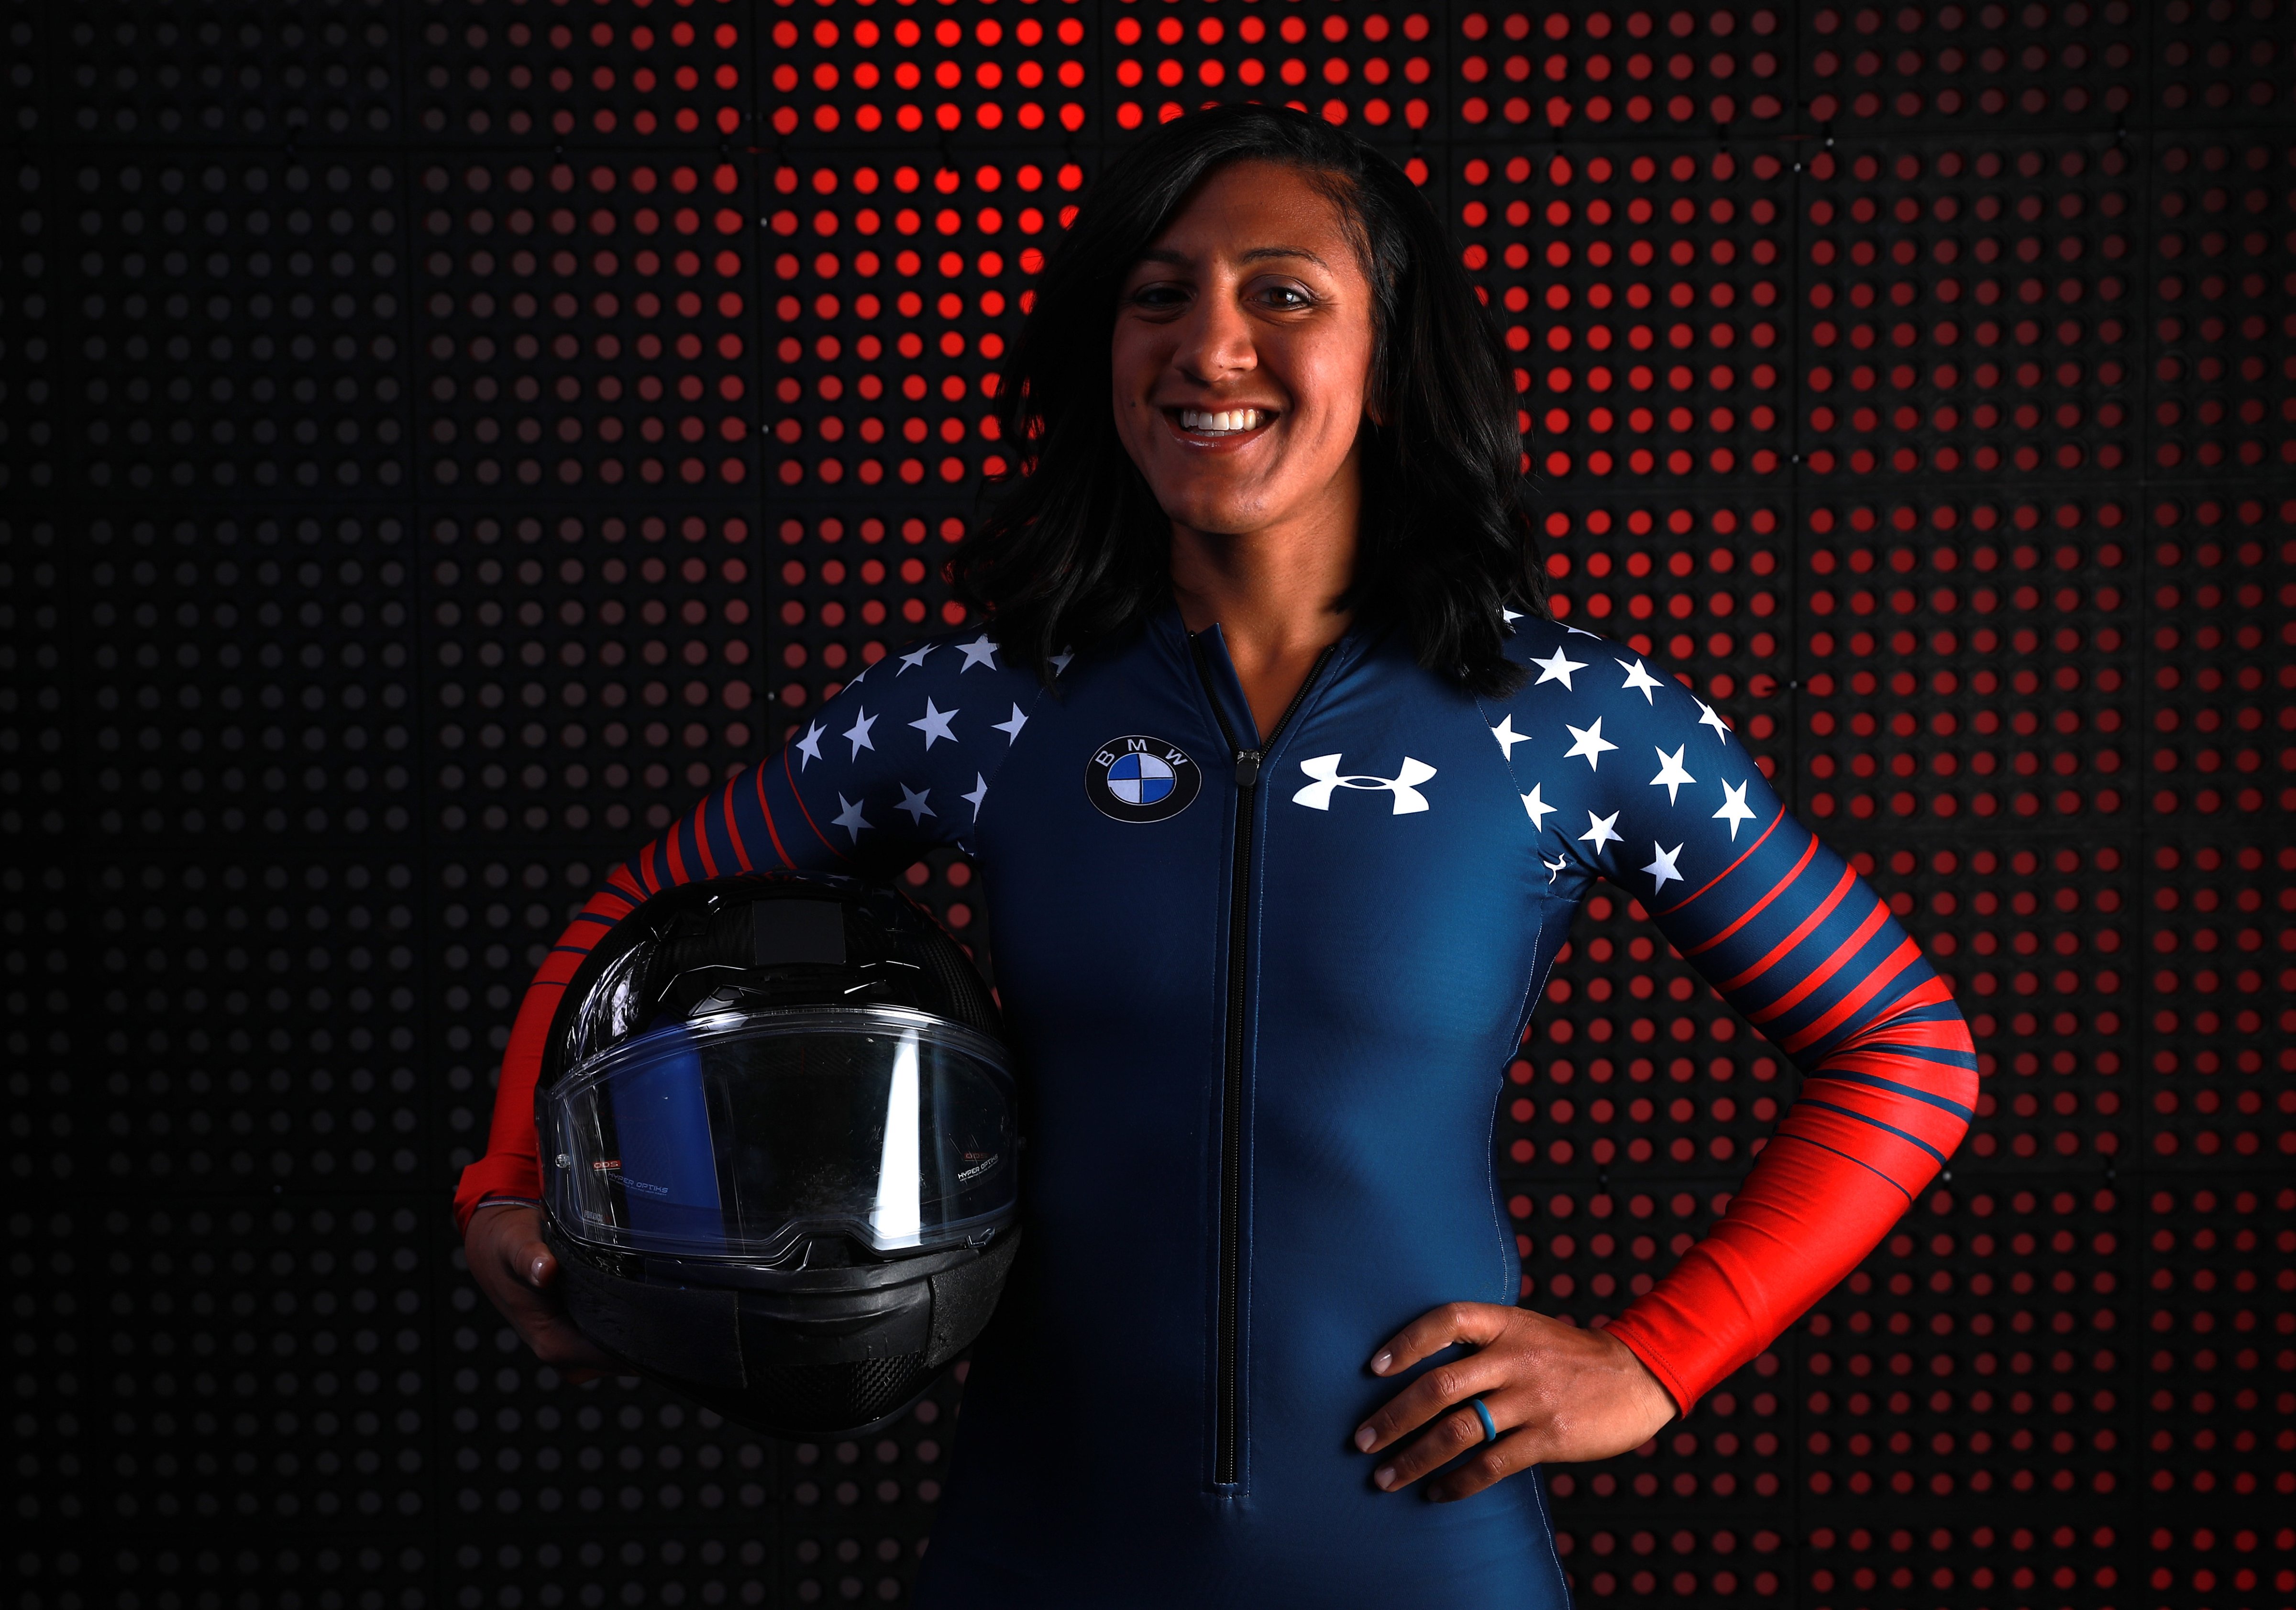 Bobsledder Elana Meyers Taylor poses for a portrait during the Team USA Media Summit ahead of the PyeongChang 2018 Olympic Winter Games on September 25, 2017 in Park City, Utah. Tom Pennington—Getty Images. (Tom Pennington—Getty Images.)